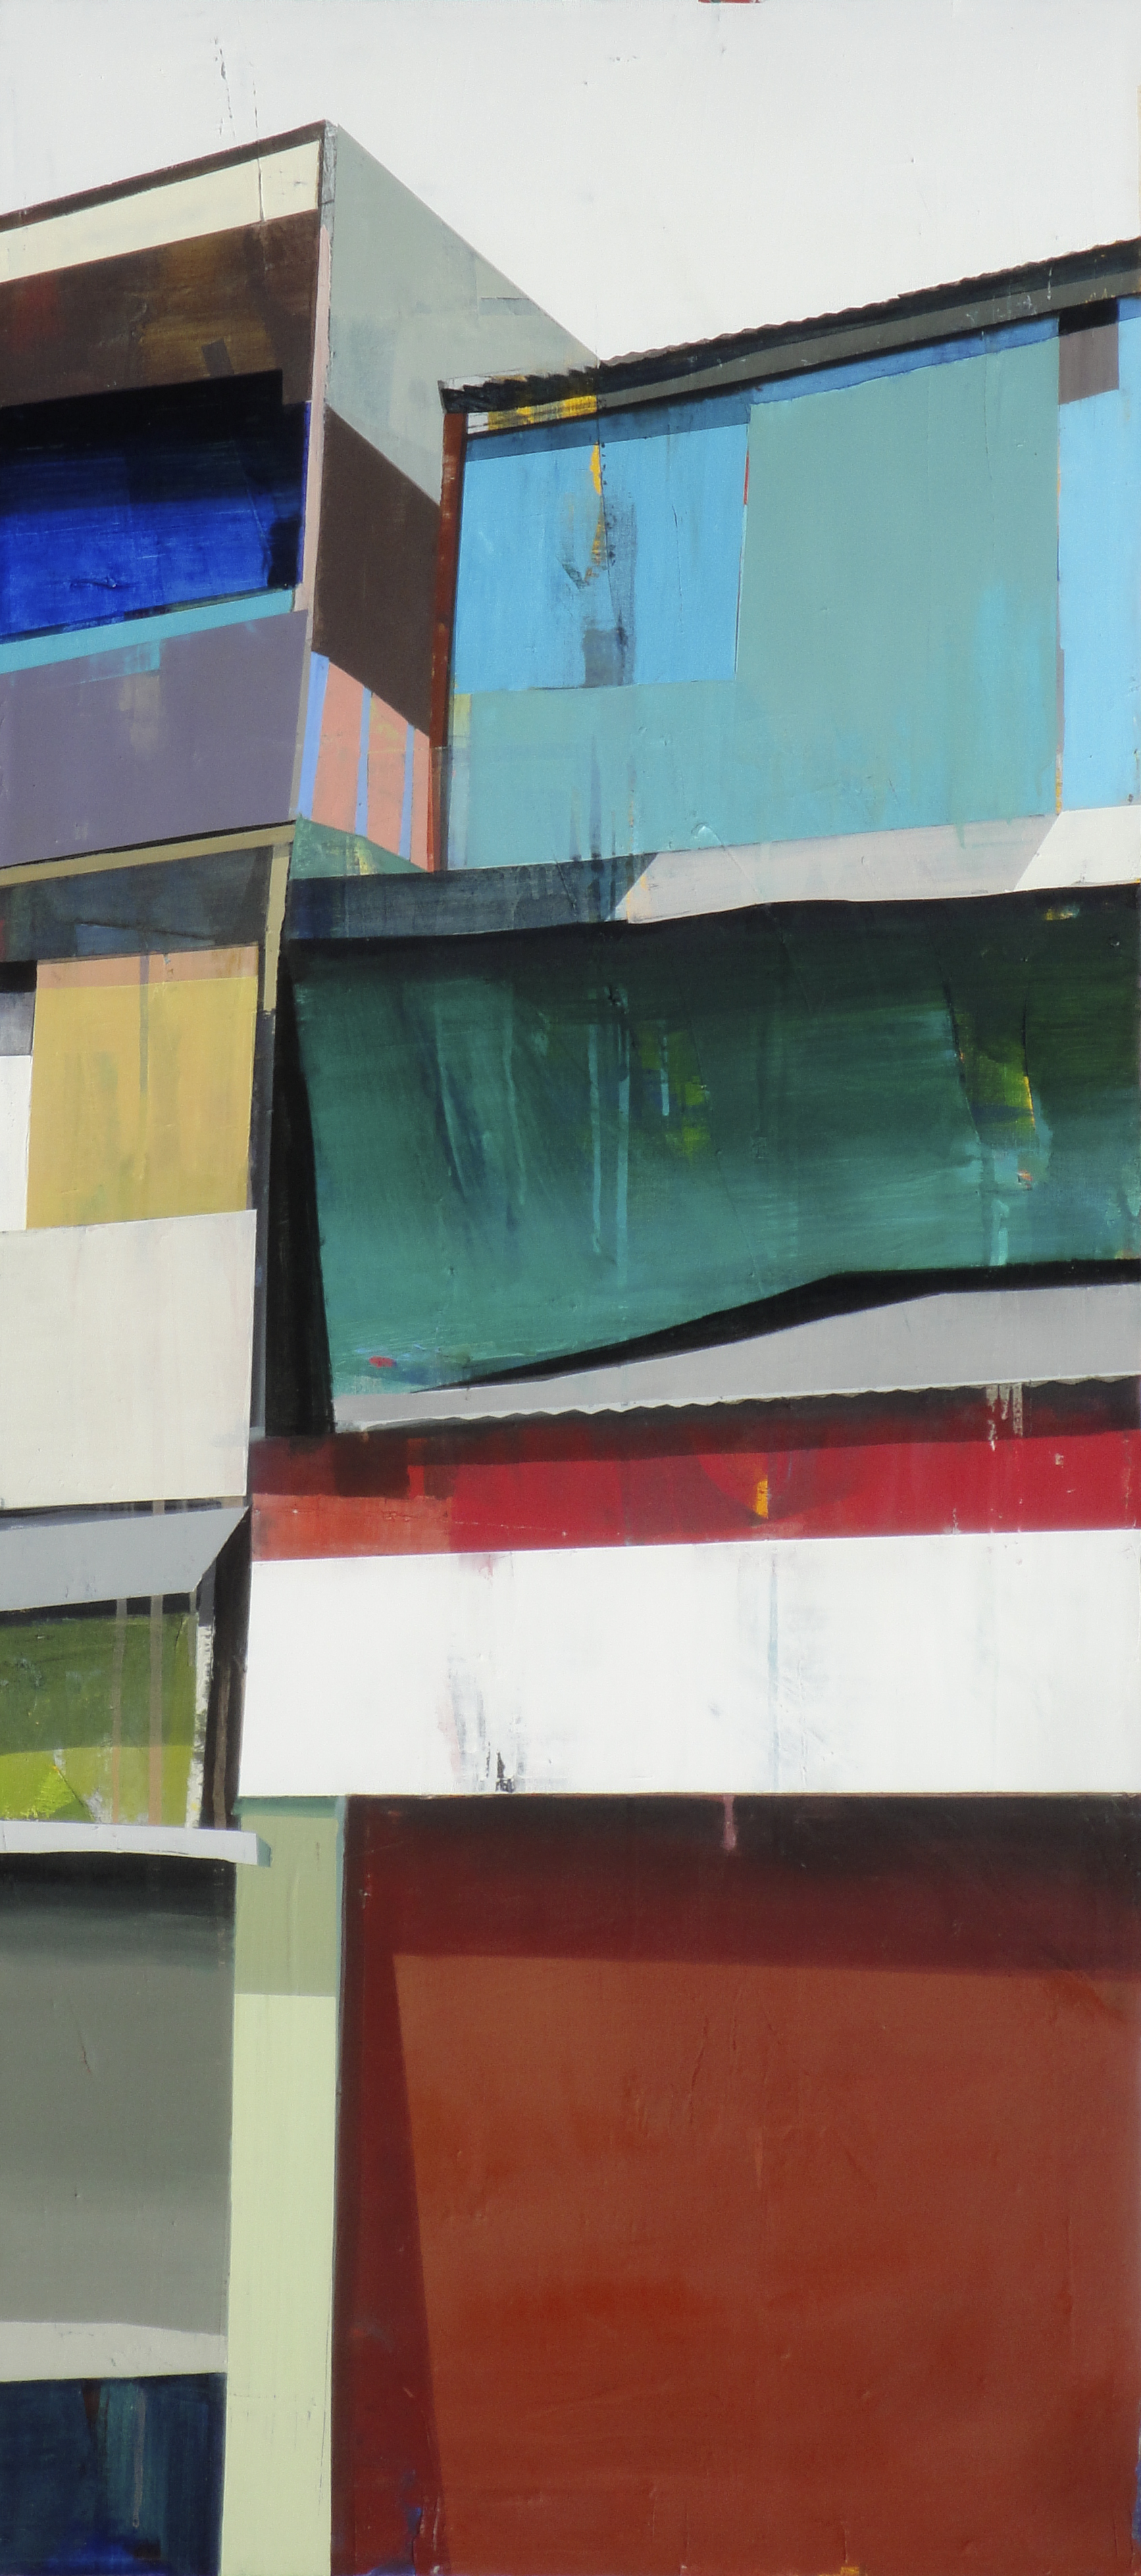 Storefront # 4, 60” x 27”, Oil on canvas 2015